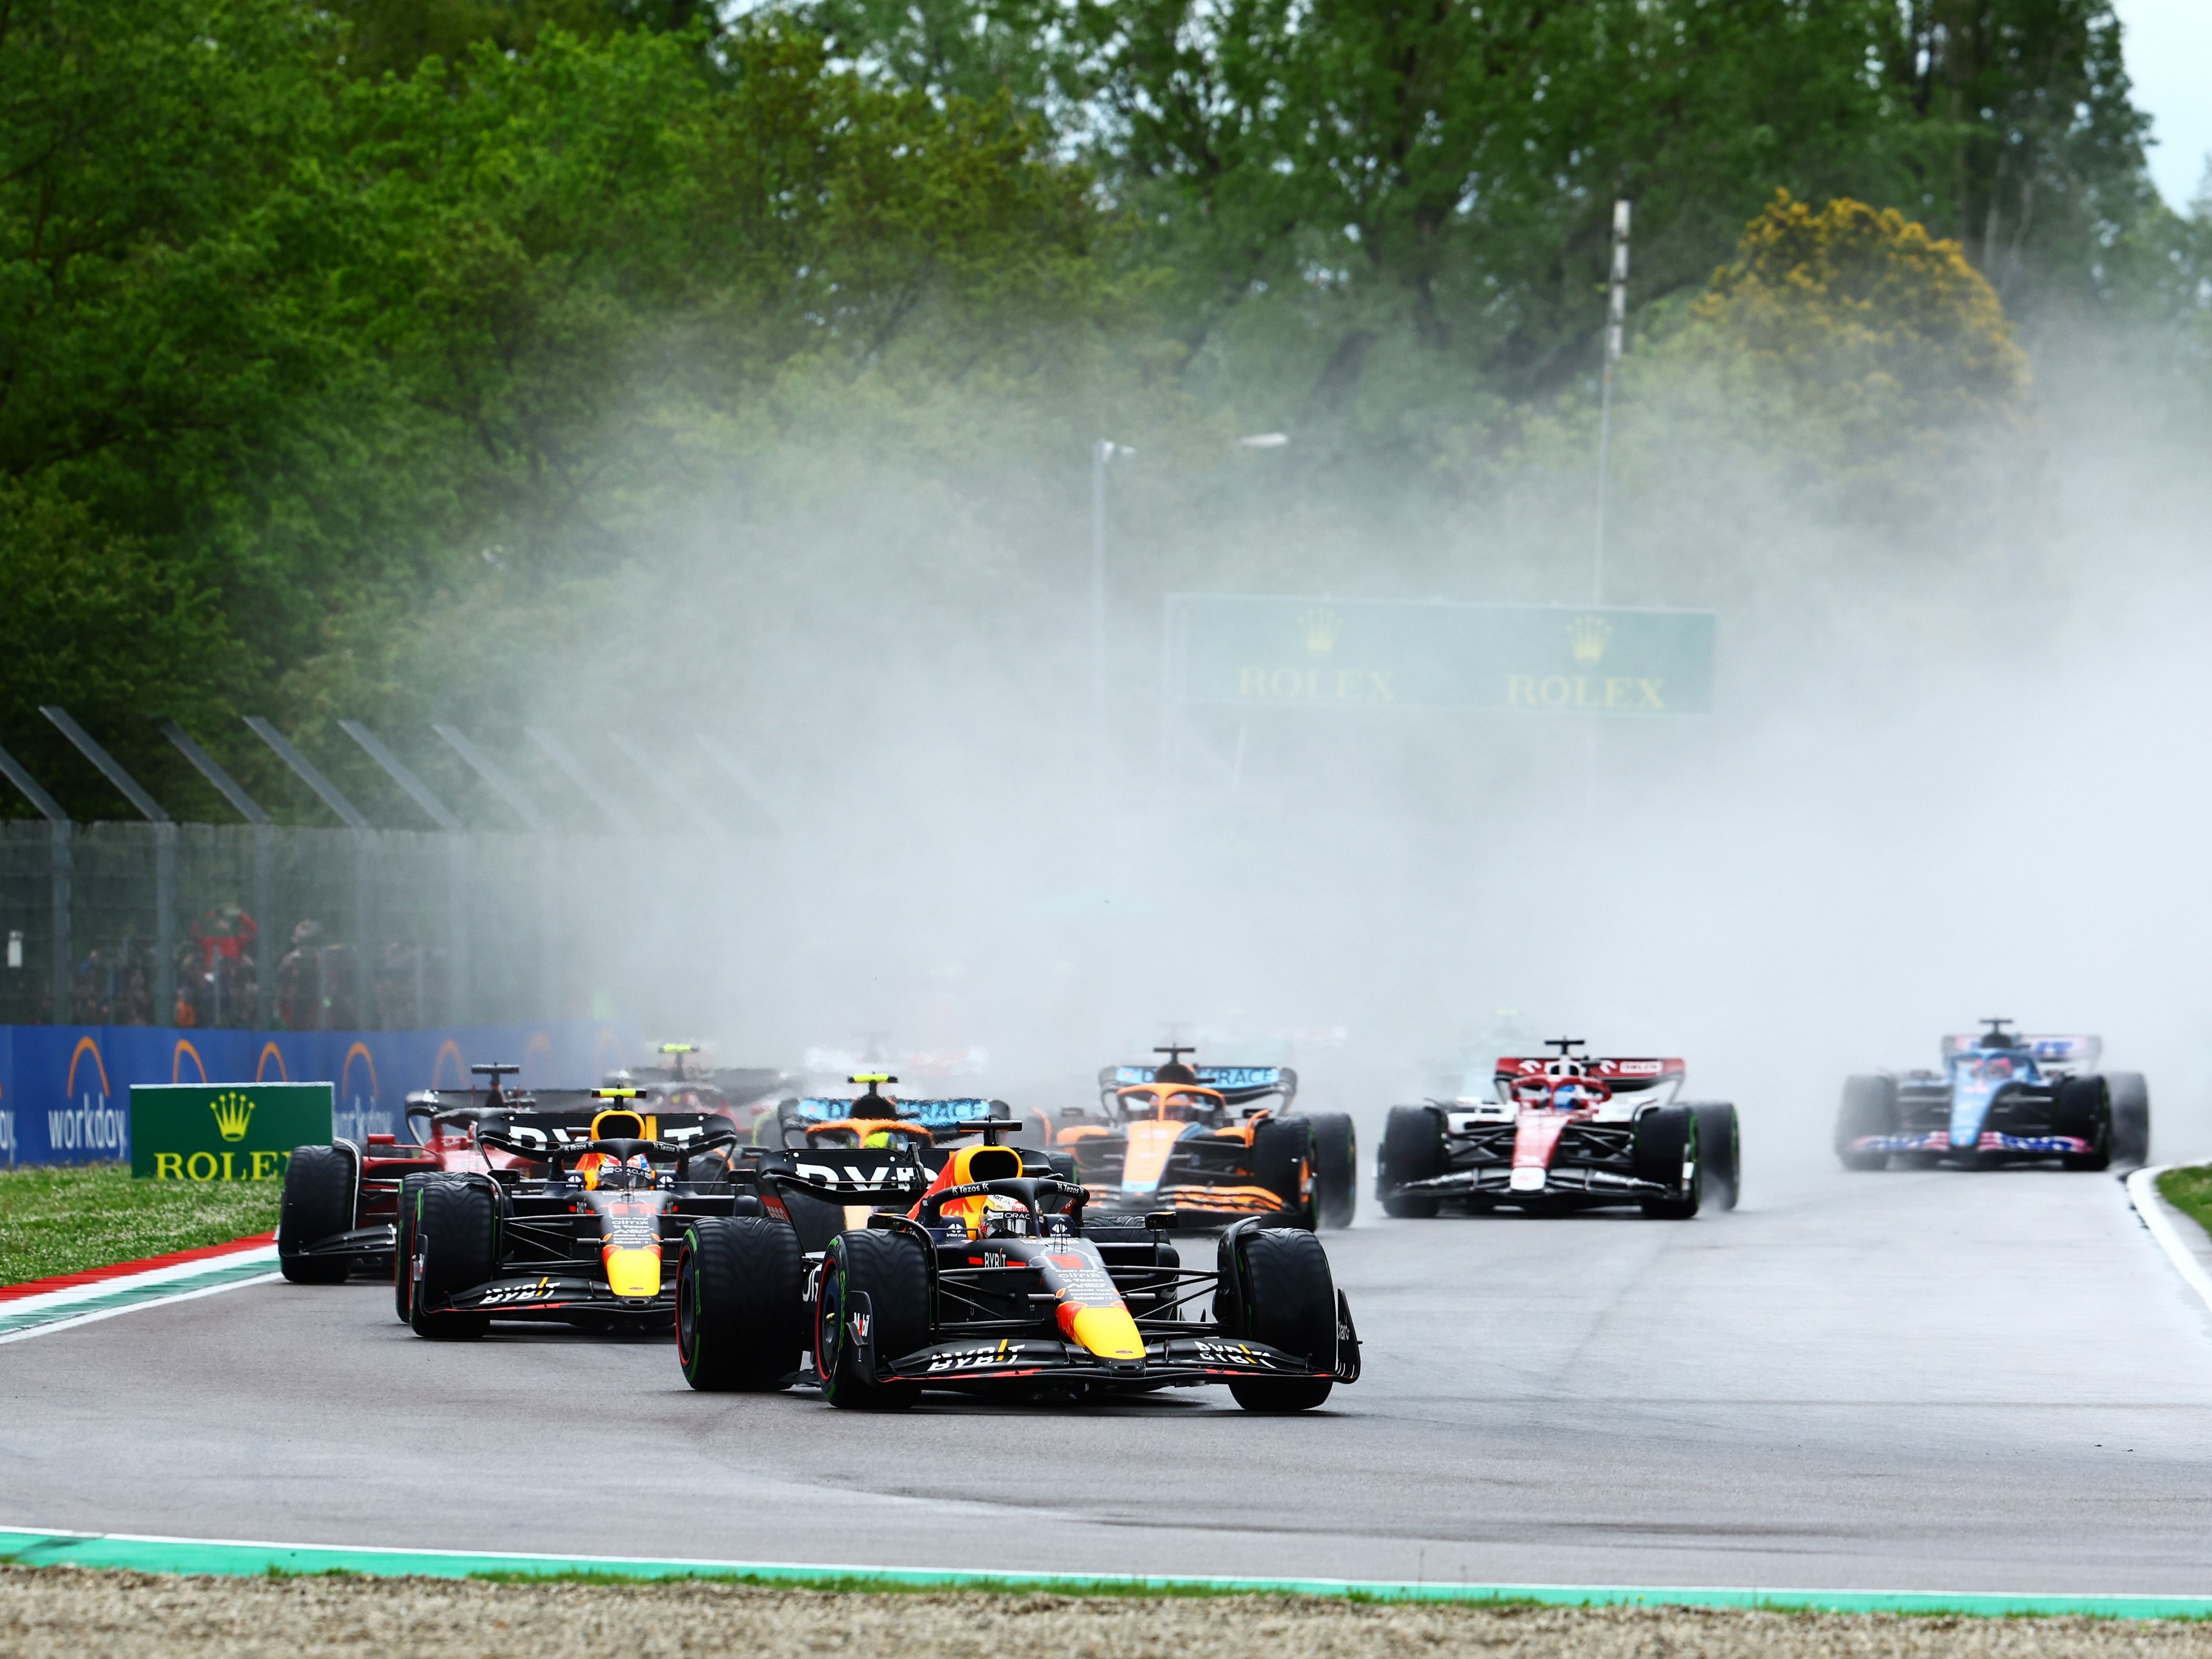 Max Verstappen (1) leads Sergio Perez (11) and the rest of the field into turn one at the start during the 2022 F1 Emilia Romagna Grand Prix. (Photo by Mark Thompson/Getty Images)